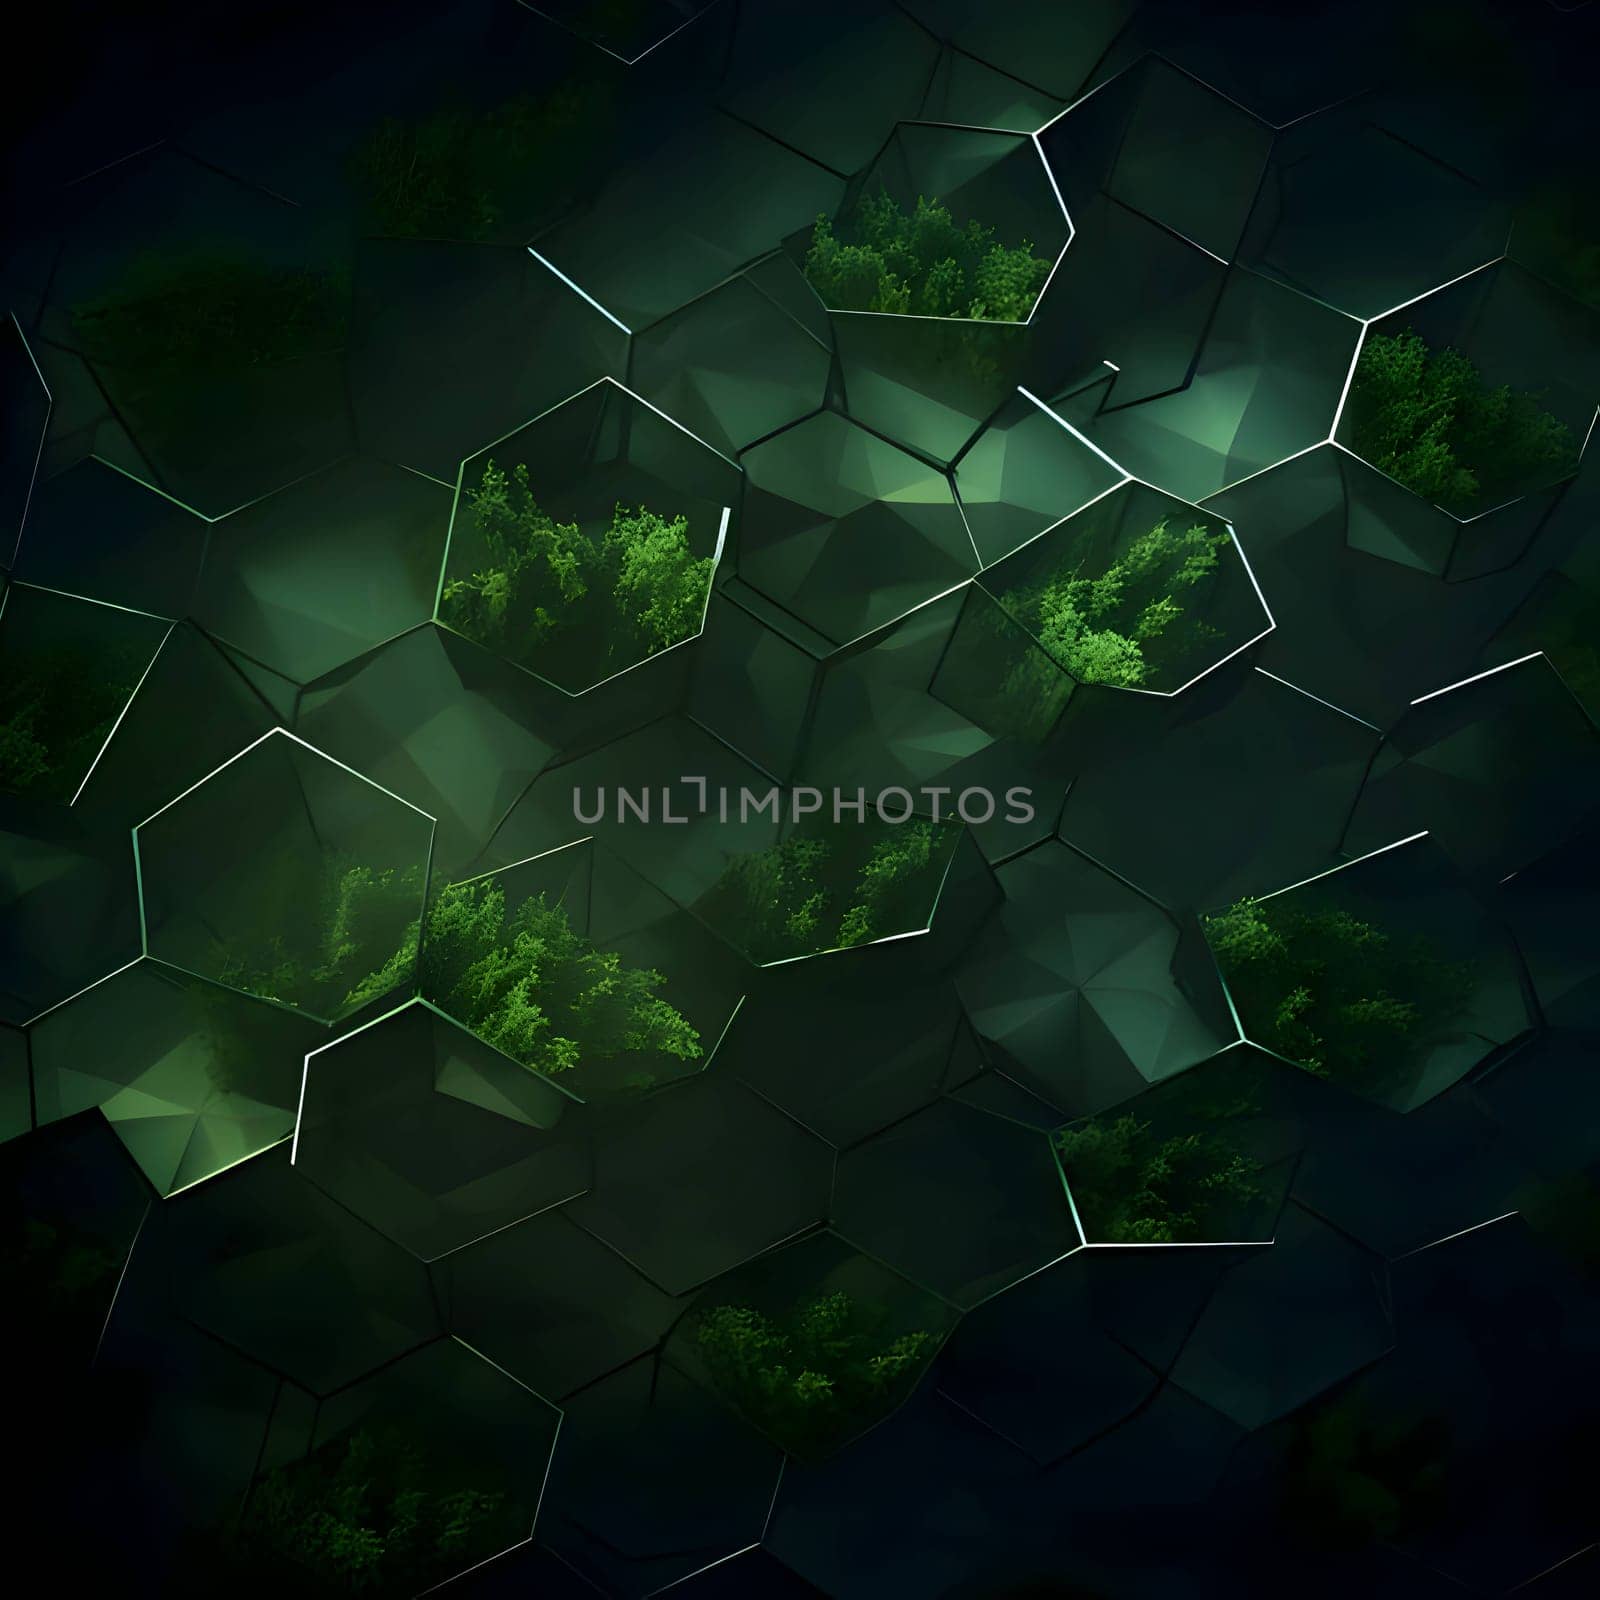 A minimal green glowing technology background featuring hexagons forms a captivating abstract wallpaper.